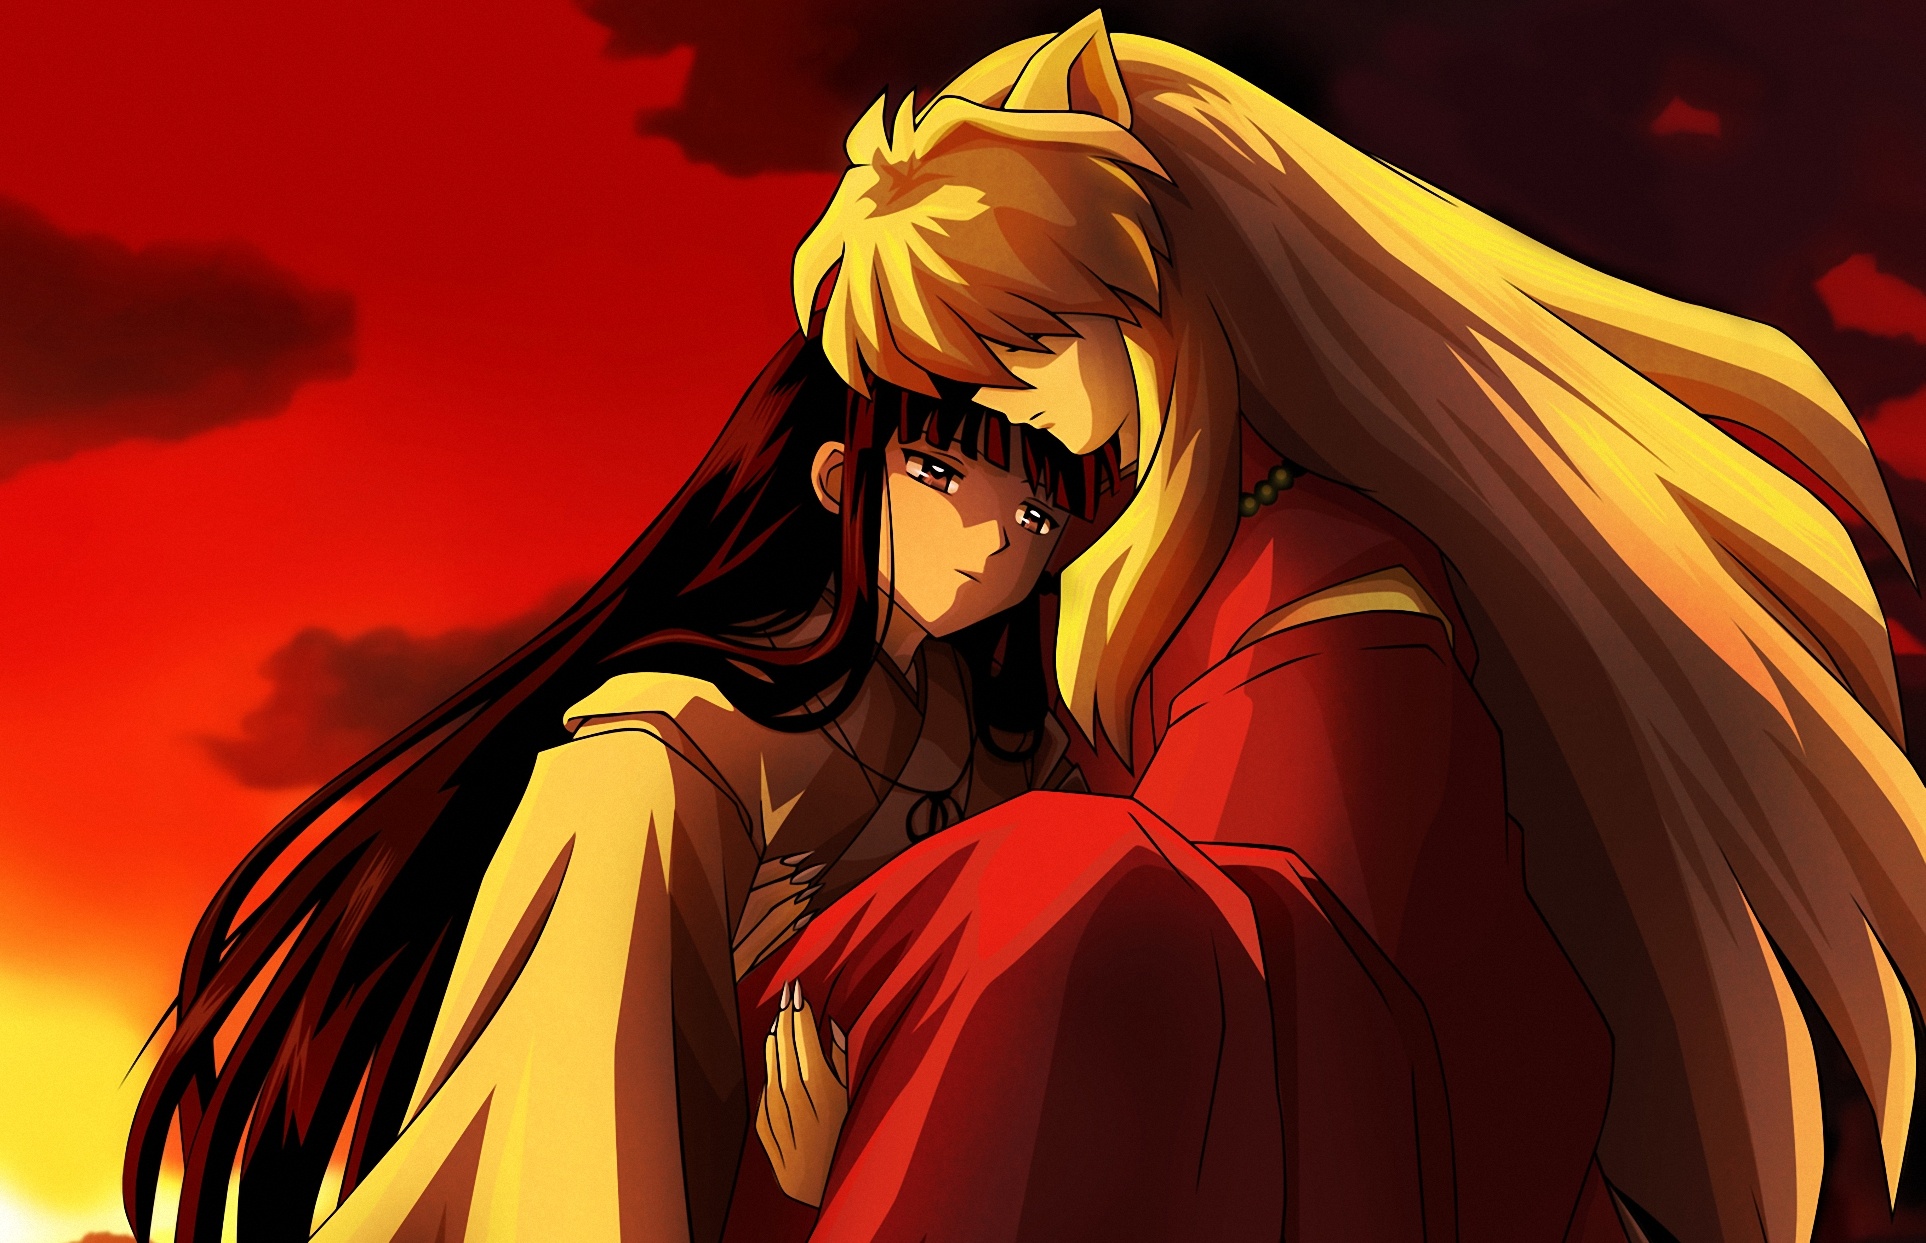 InuYasha, Anime series, HD wallpapers, Background images, 1930x1250 HD Desktop